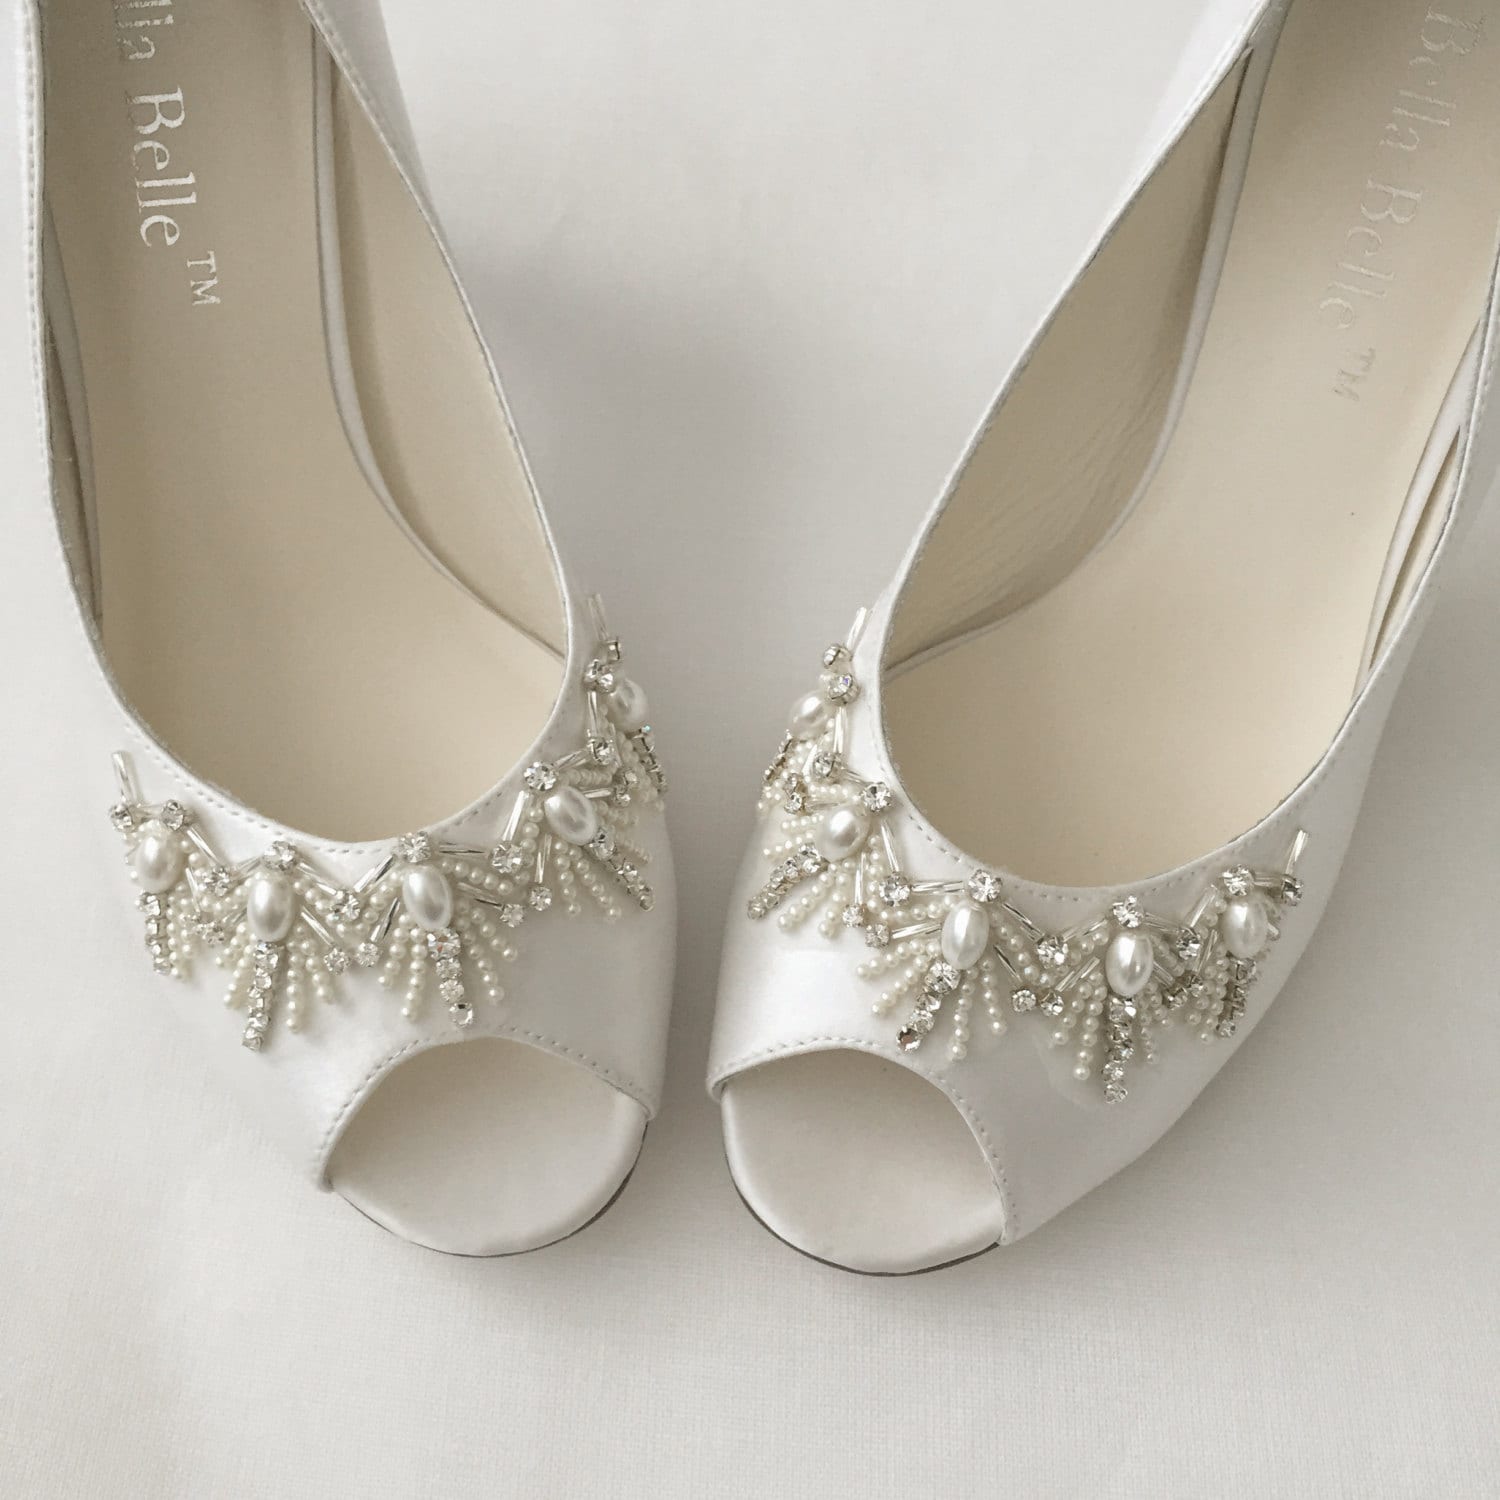 White or Ivory Wedding Shoes with Art Deco by BellaBelleShoe